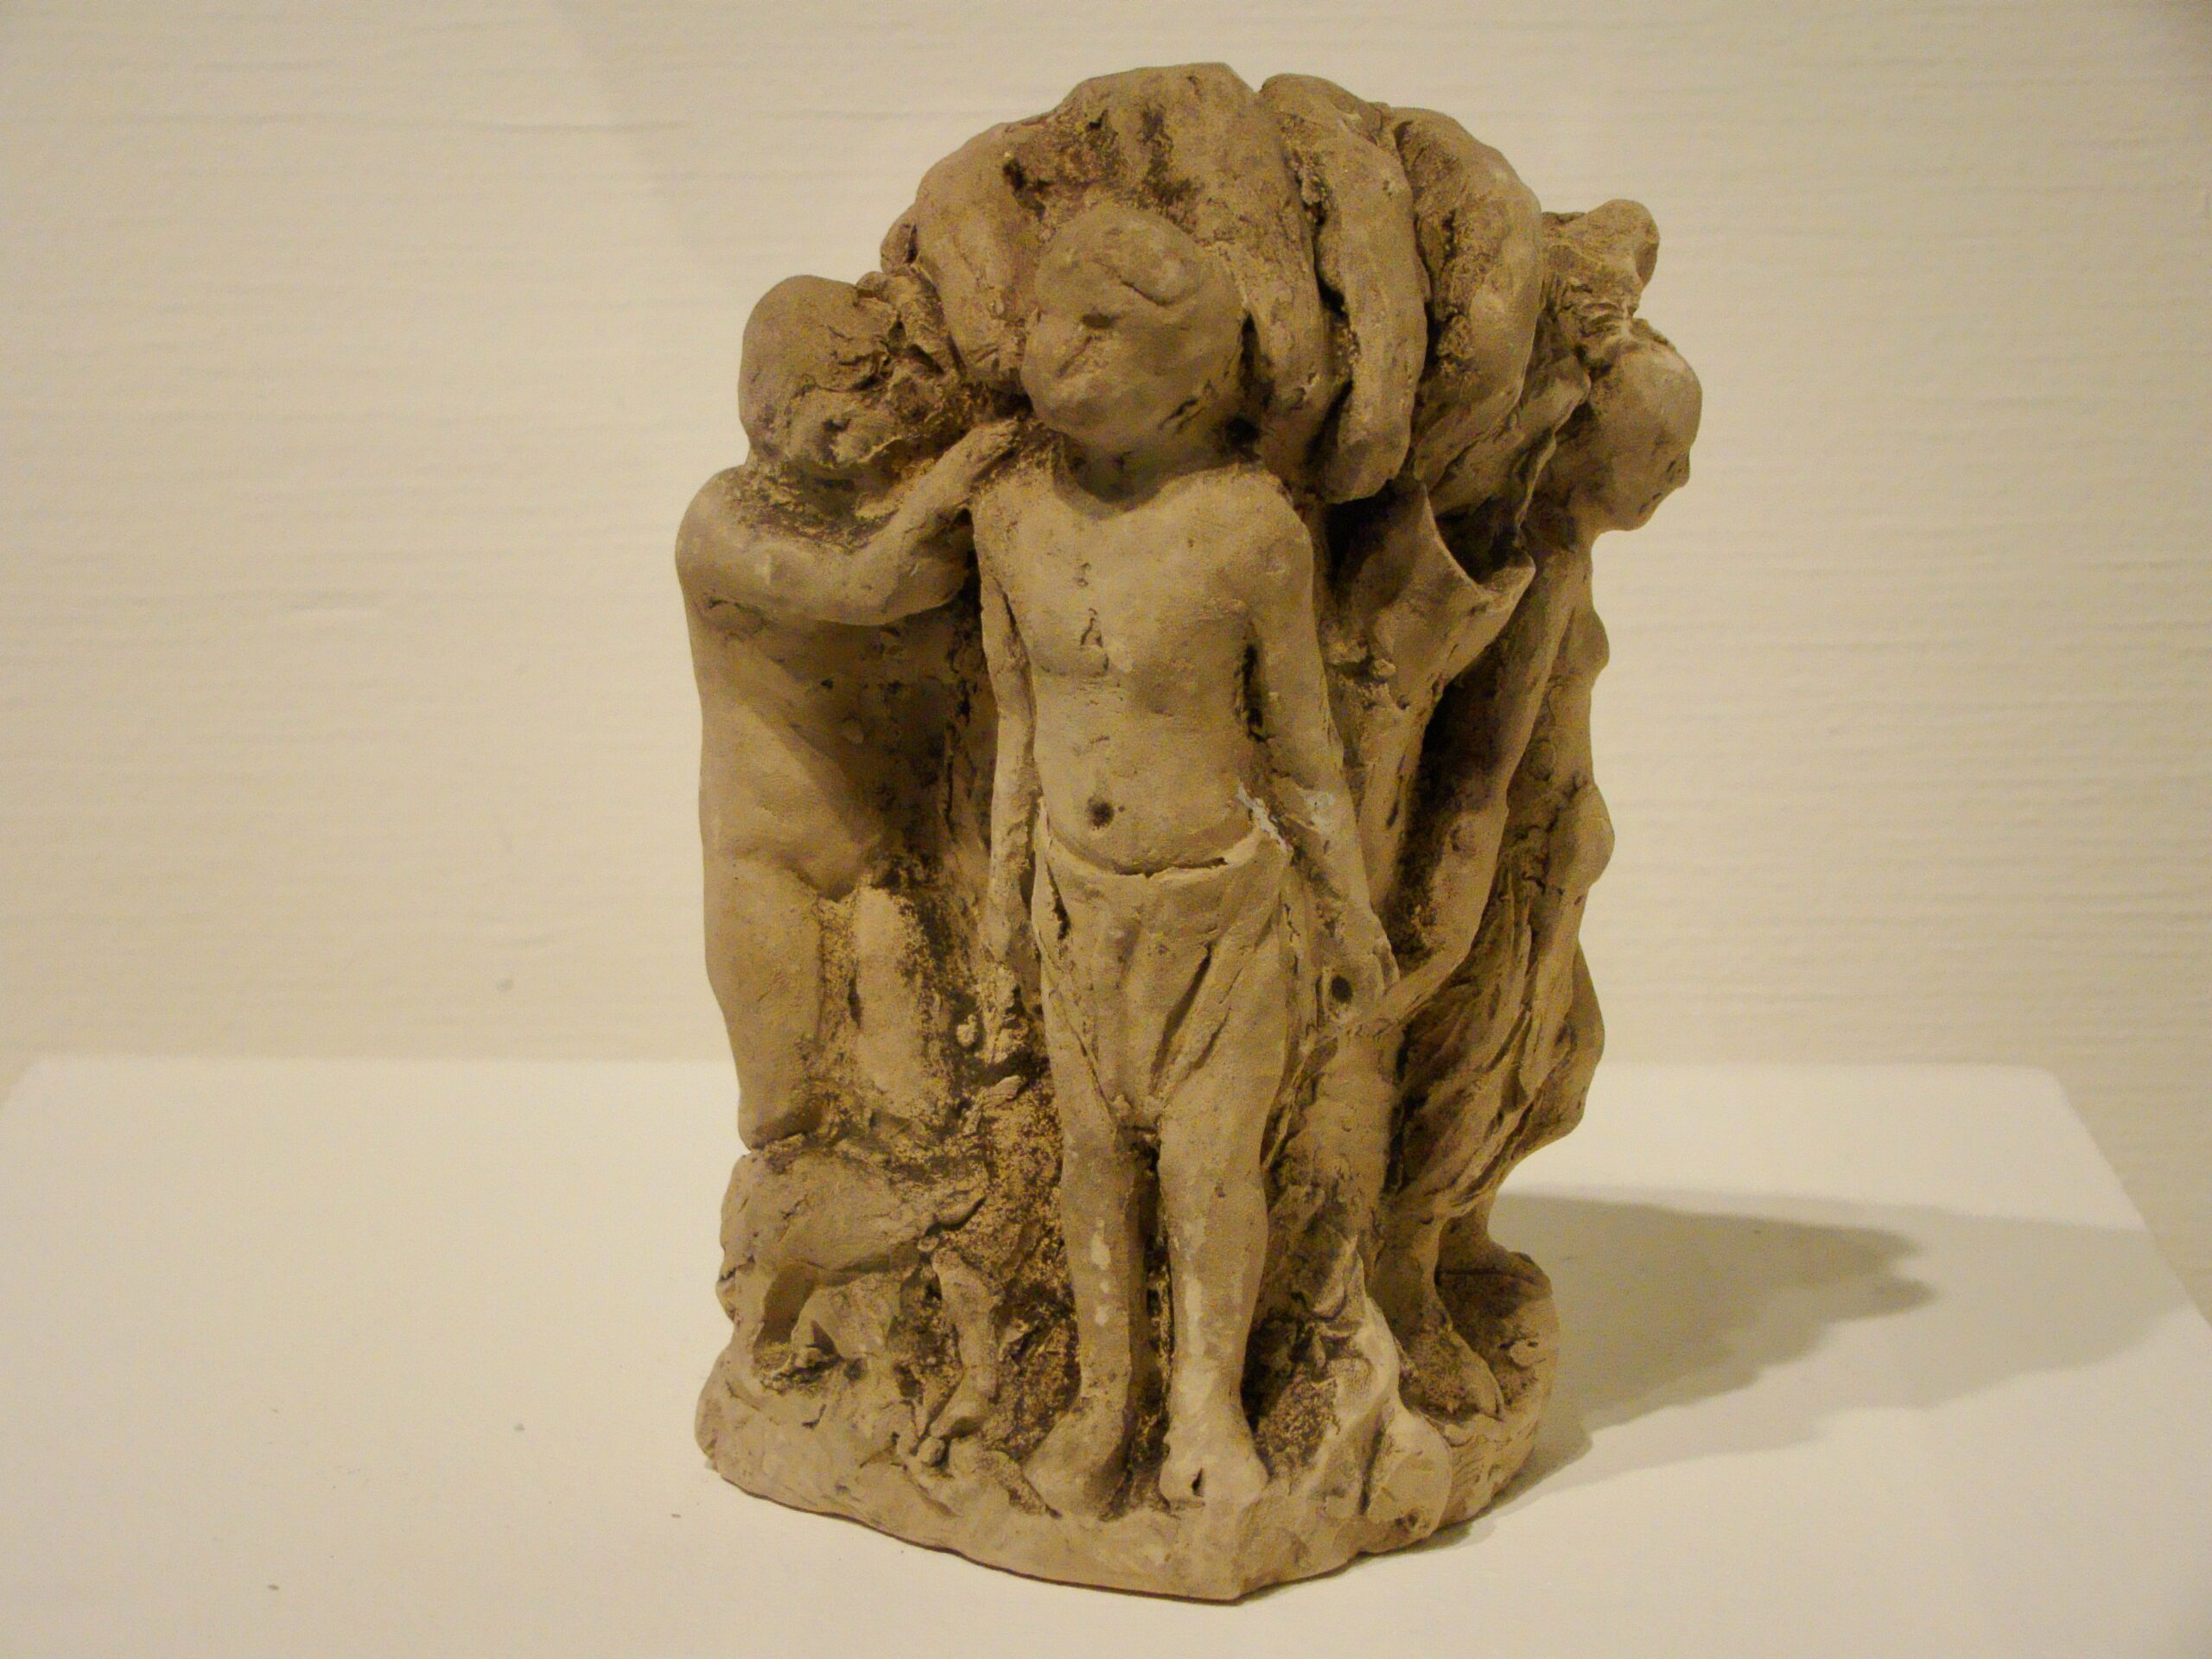 Small clay sculpture of several child like figures under a large hand that is reaching out to them.